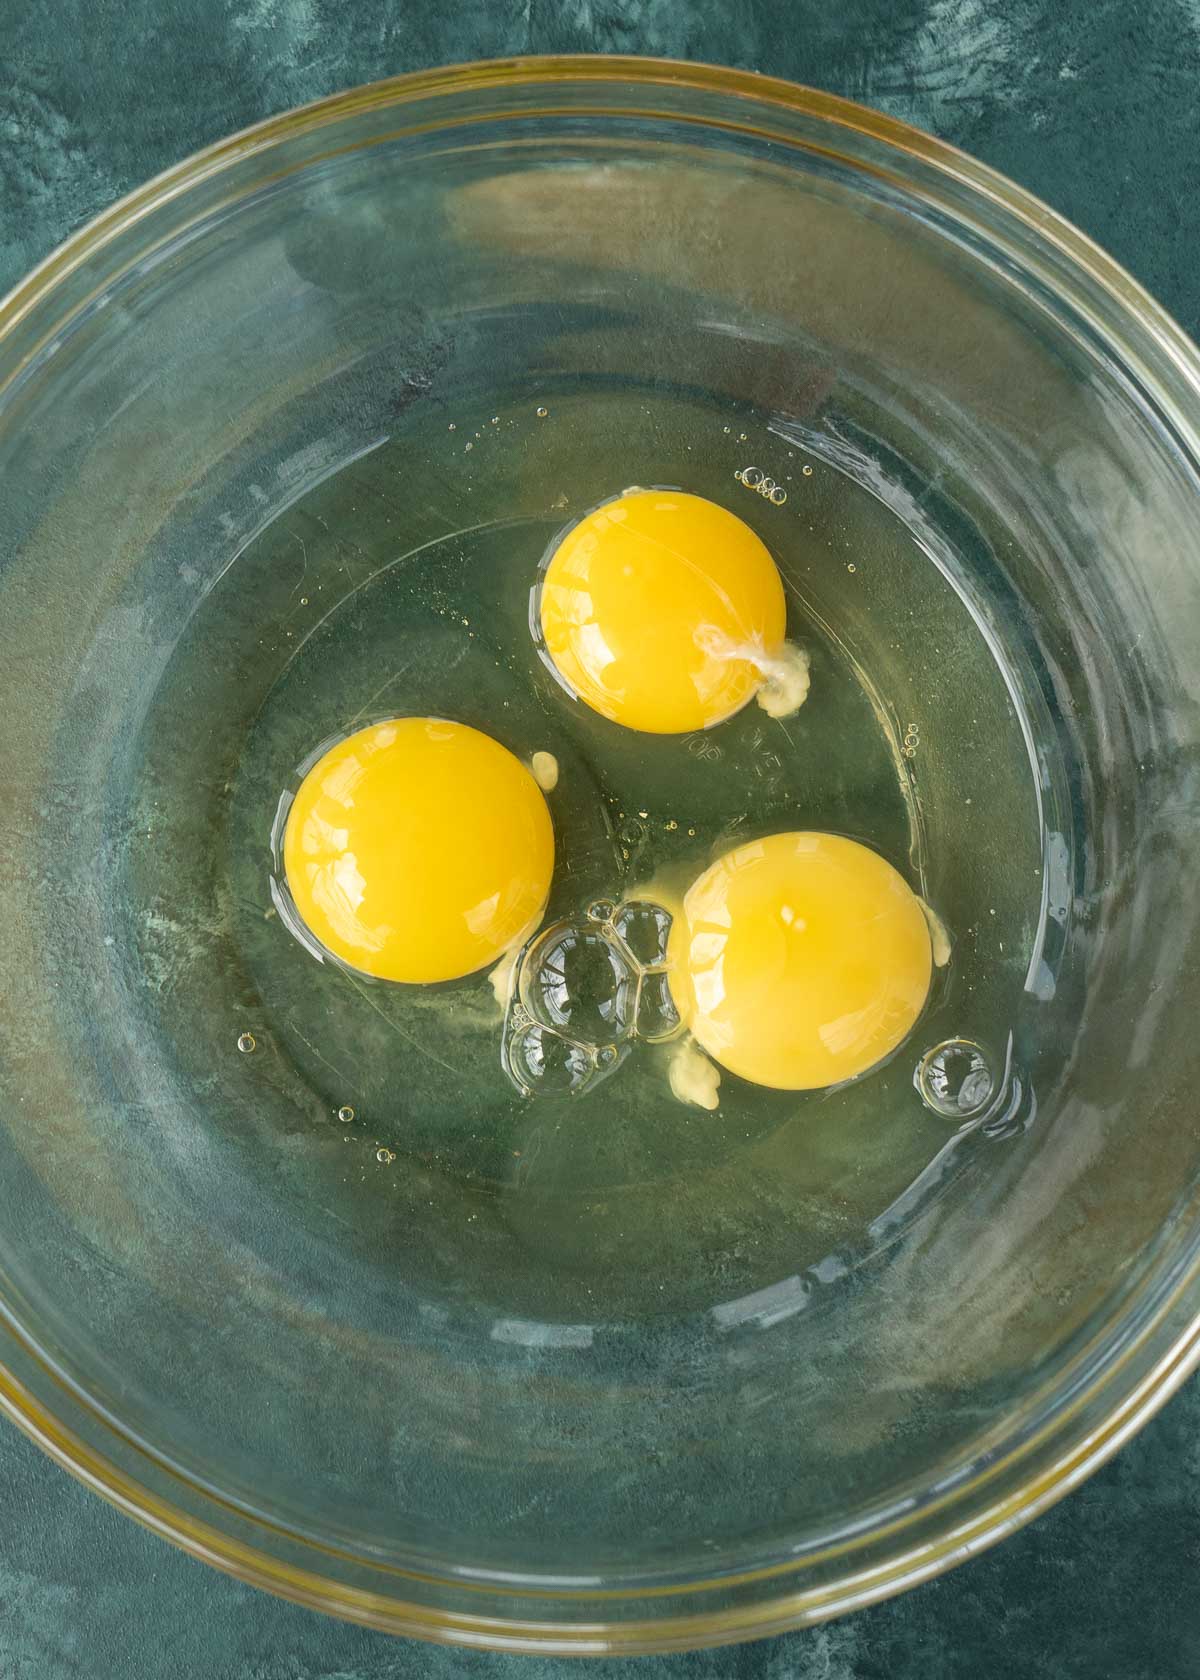 3 eggs in a glass bowl